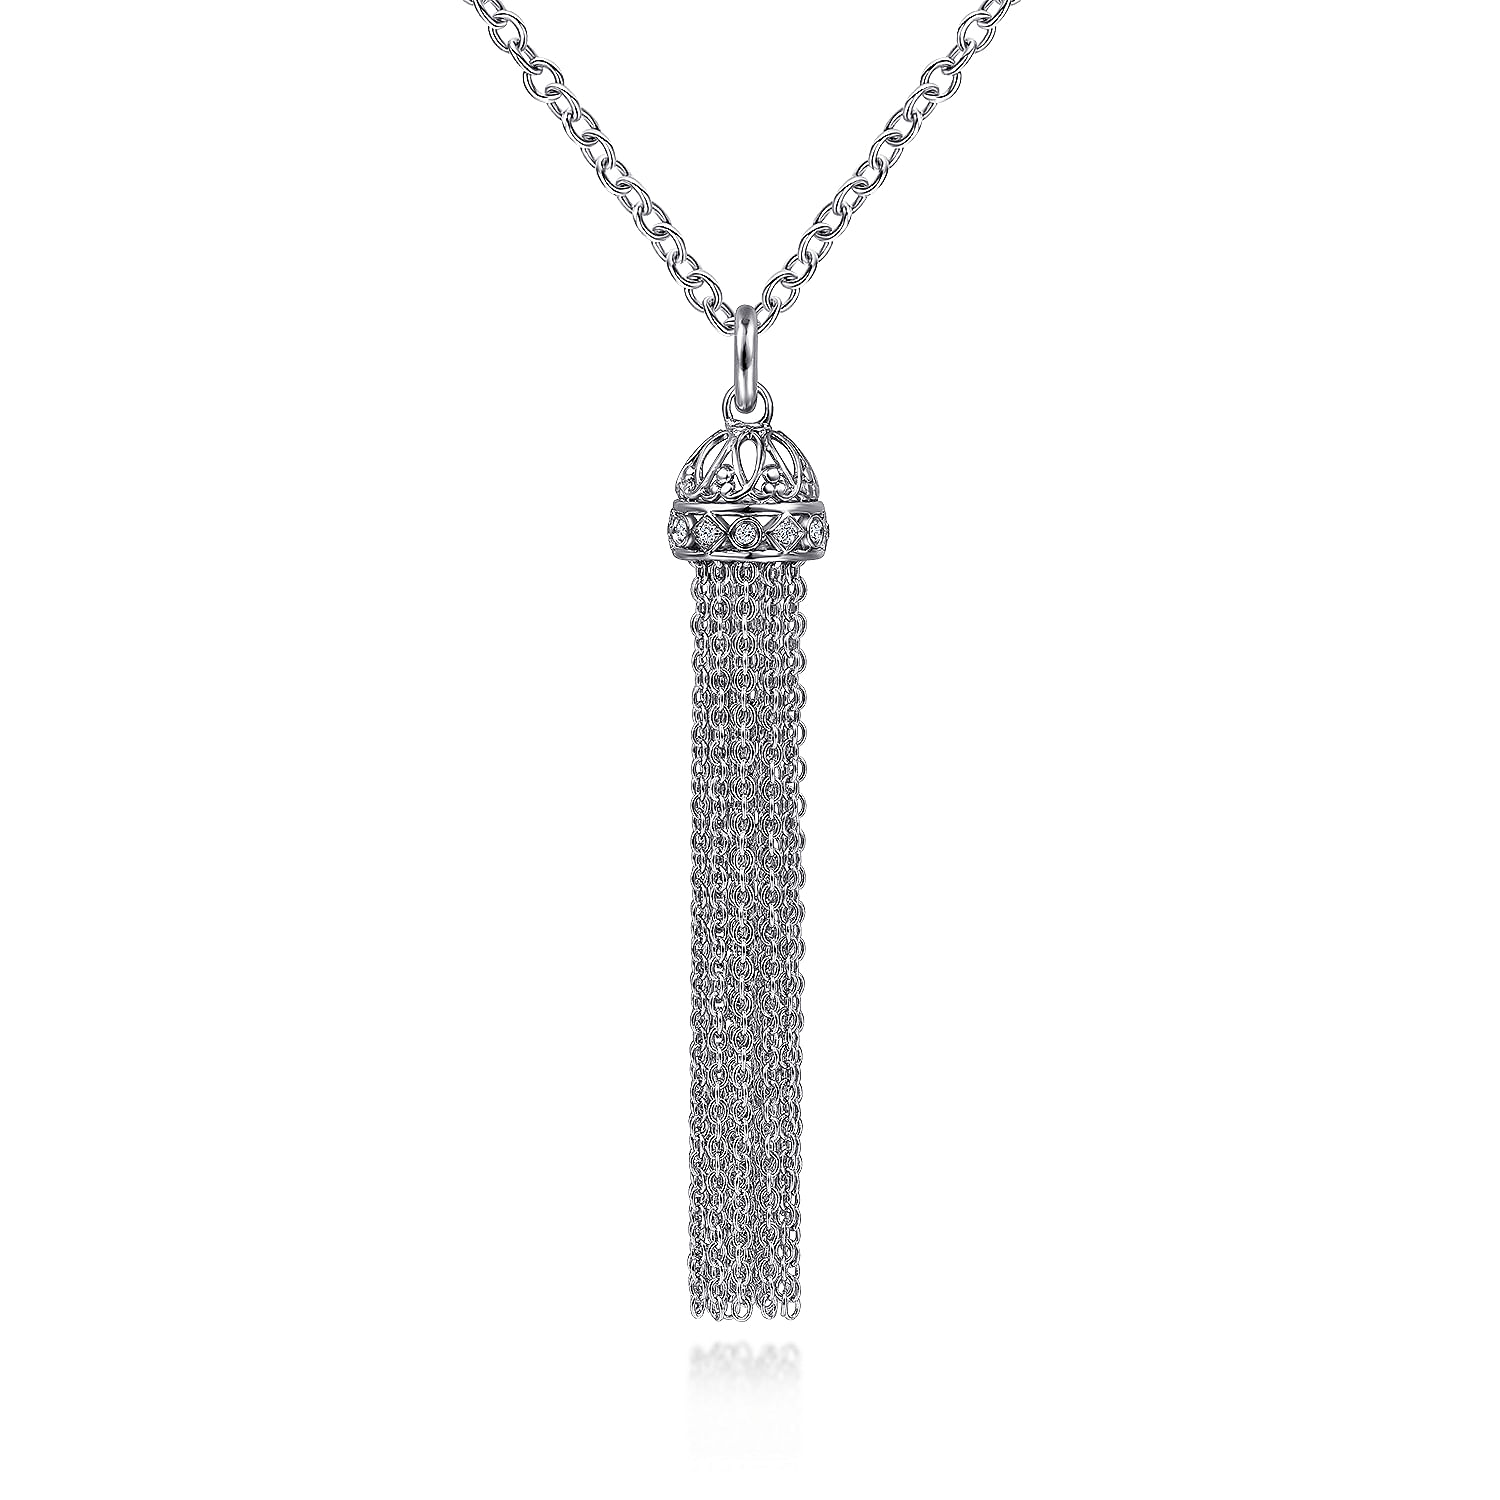 30 inch 925 Sterling Silver Chain Tassel Necklace with White Sapphire Filigree Cap